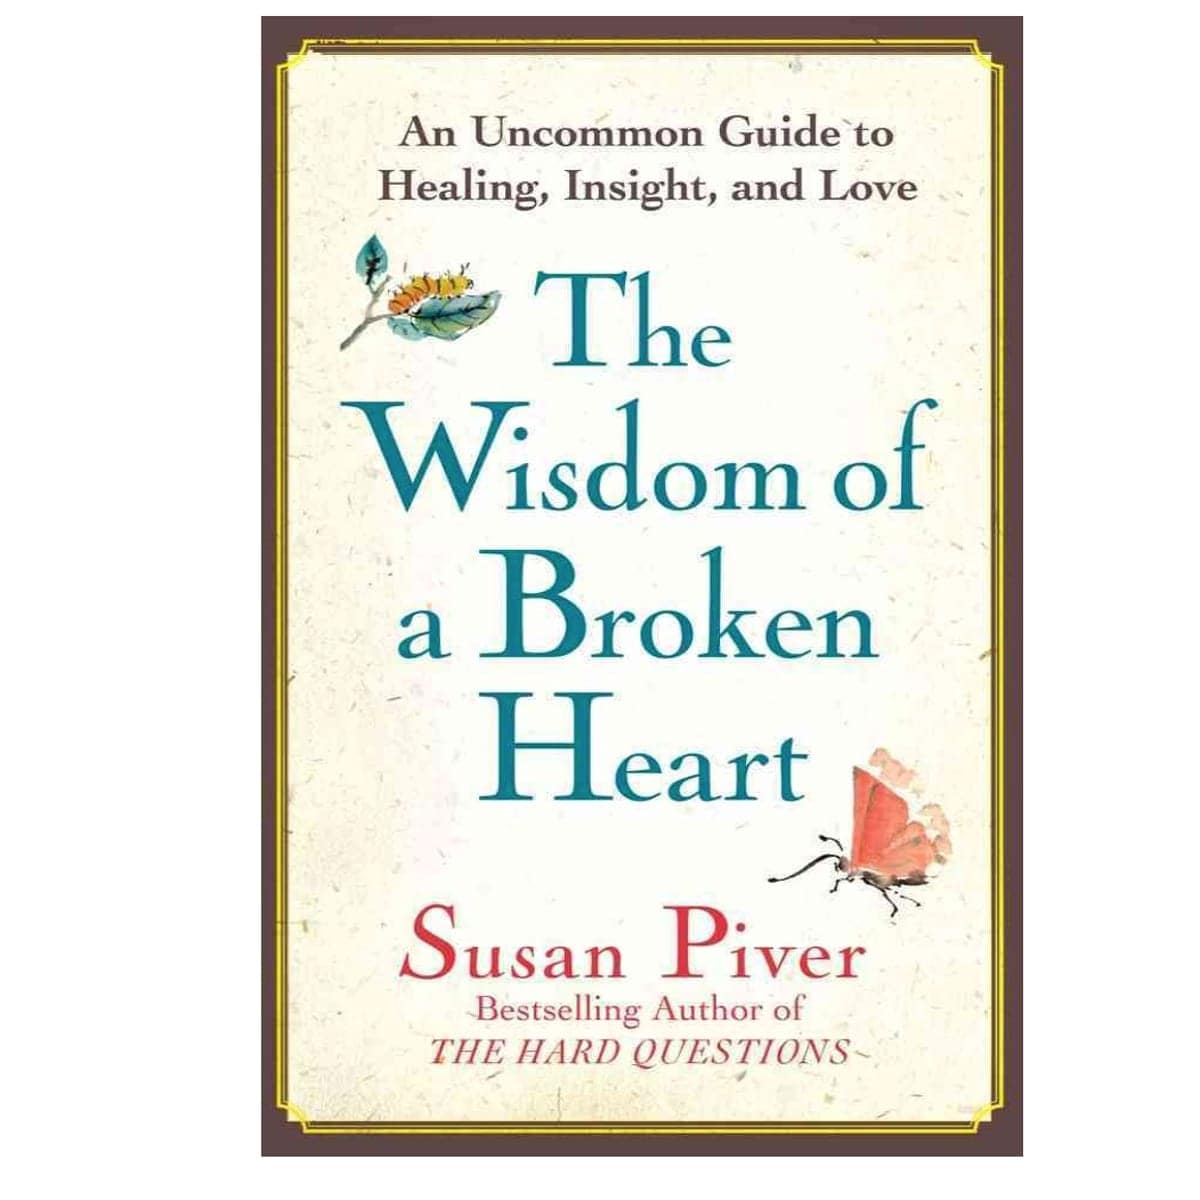 The Wisdom of a Broken Heart: An Uncommon Guide to Healing, Insight, and Love by Susan Piver